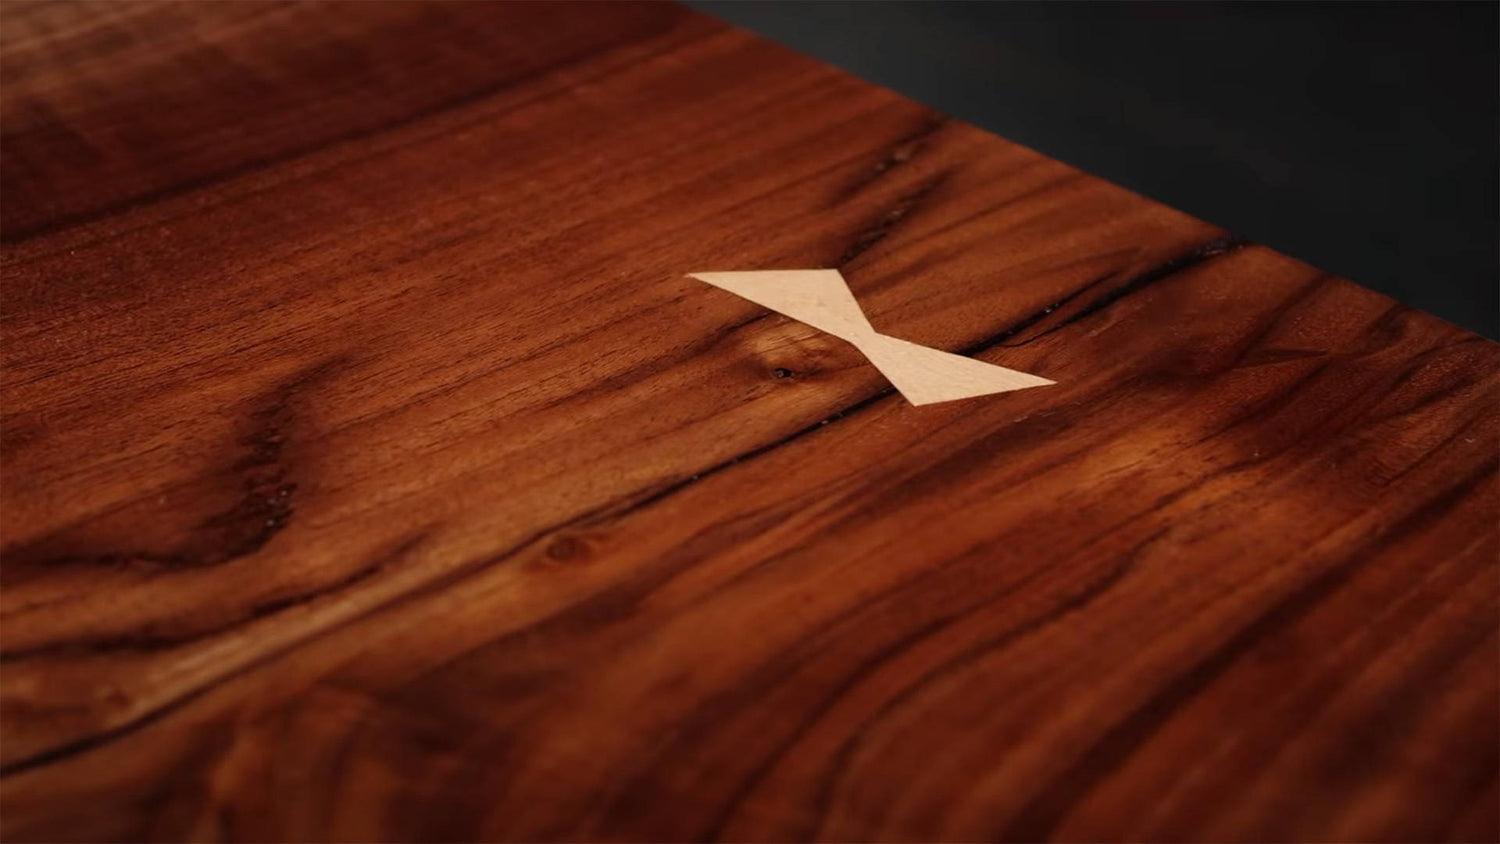 Butterfly Keys: 5 Ways to Cut Bowties and How to Inlay Anything in Wood